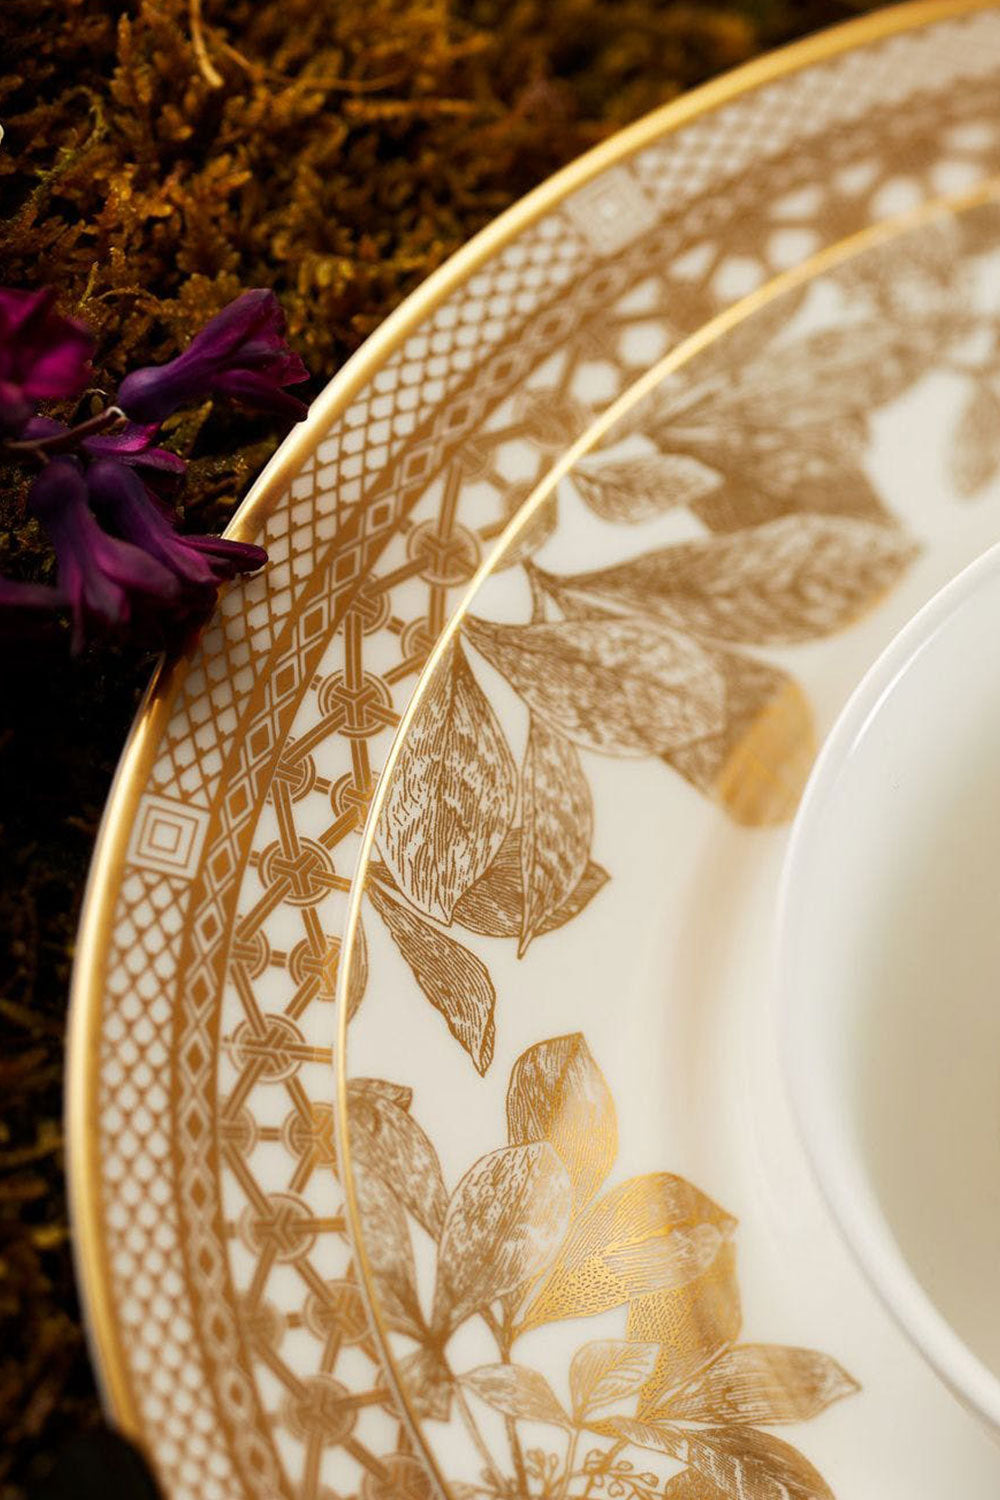 Arbor Gold Set Of 5 Place Setting